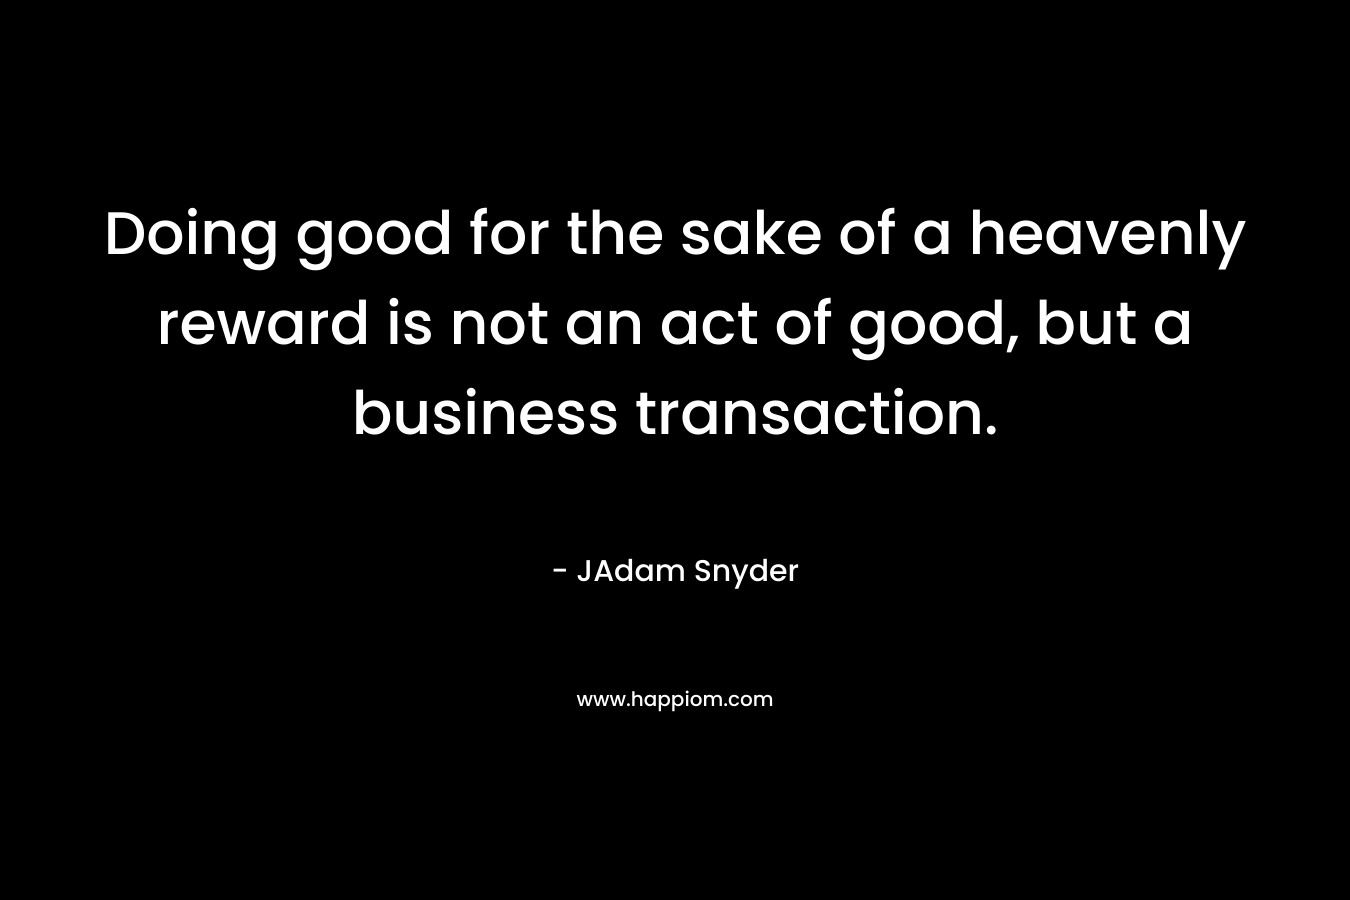 Doing good for the sake of a heavenly reward is not an act of good, but a business transaction. – JAdam Snyder